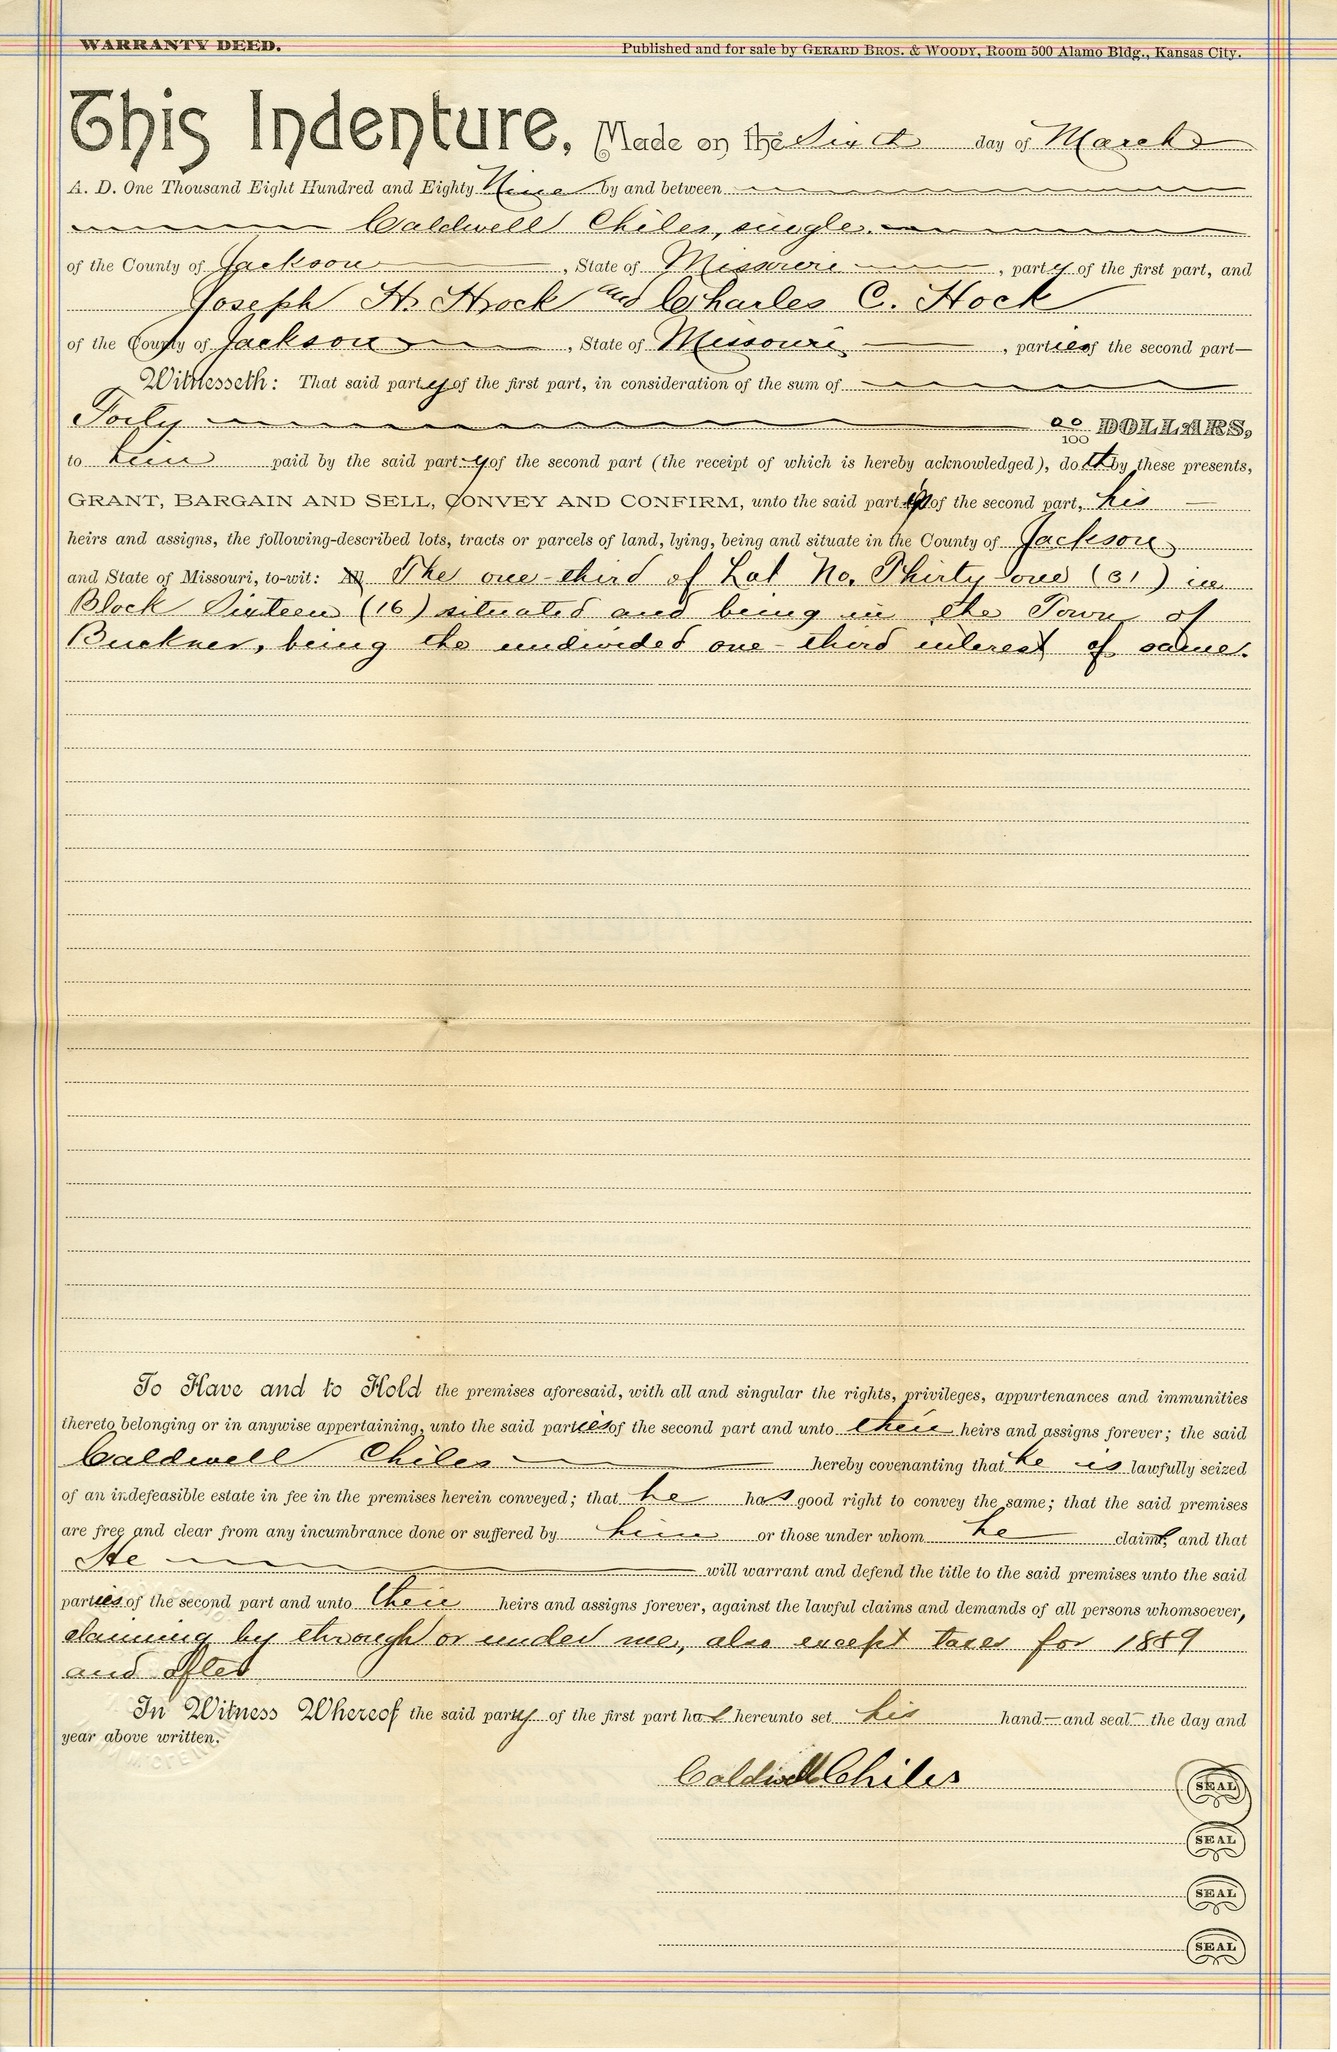 Warranty Deed from Caldwell Chiles to Joseph H. Hock and Charles C. Hock